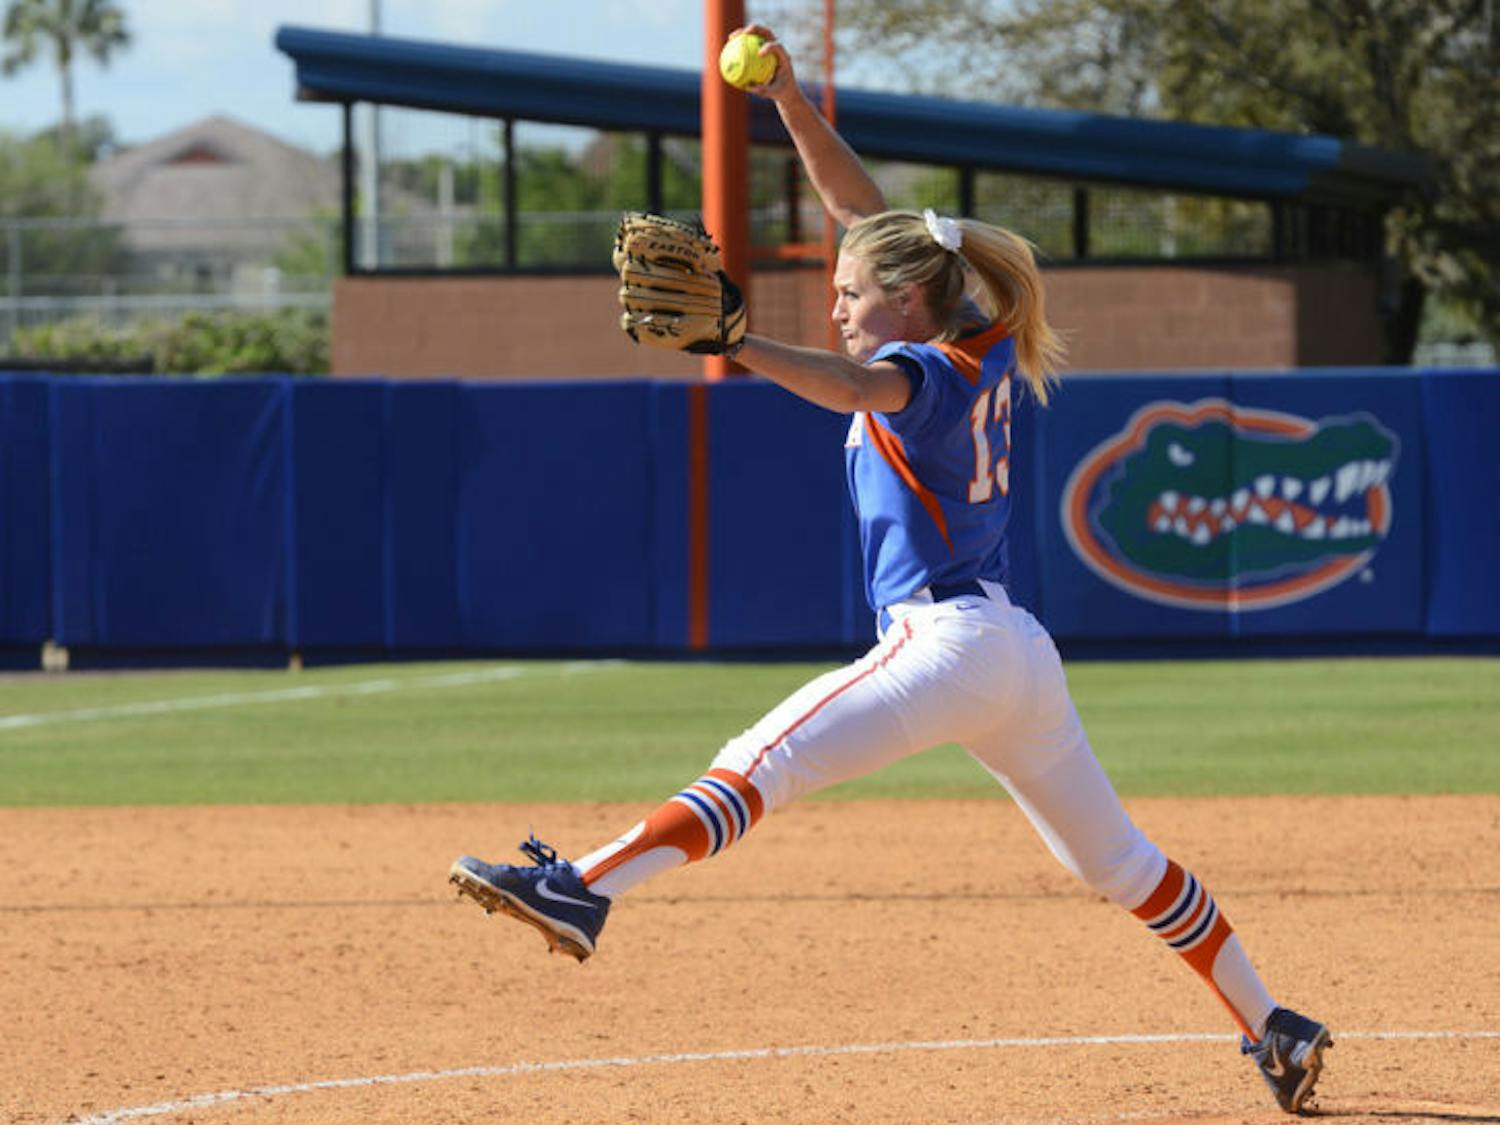 Hannah Rogers pitches during Florida’s 4-2 win against Mississippi State on April 6, 2013. Rogers has the fifth-best ERA (1.57) in the Southeastern Conference.